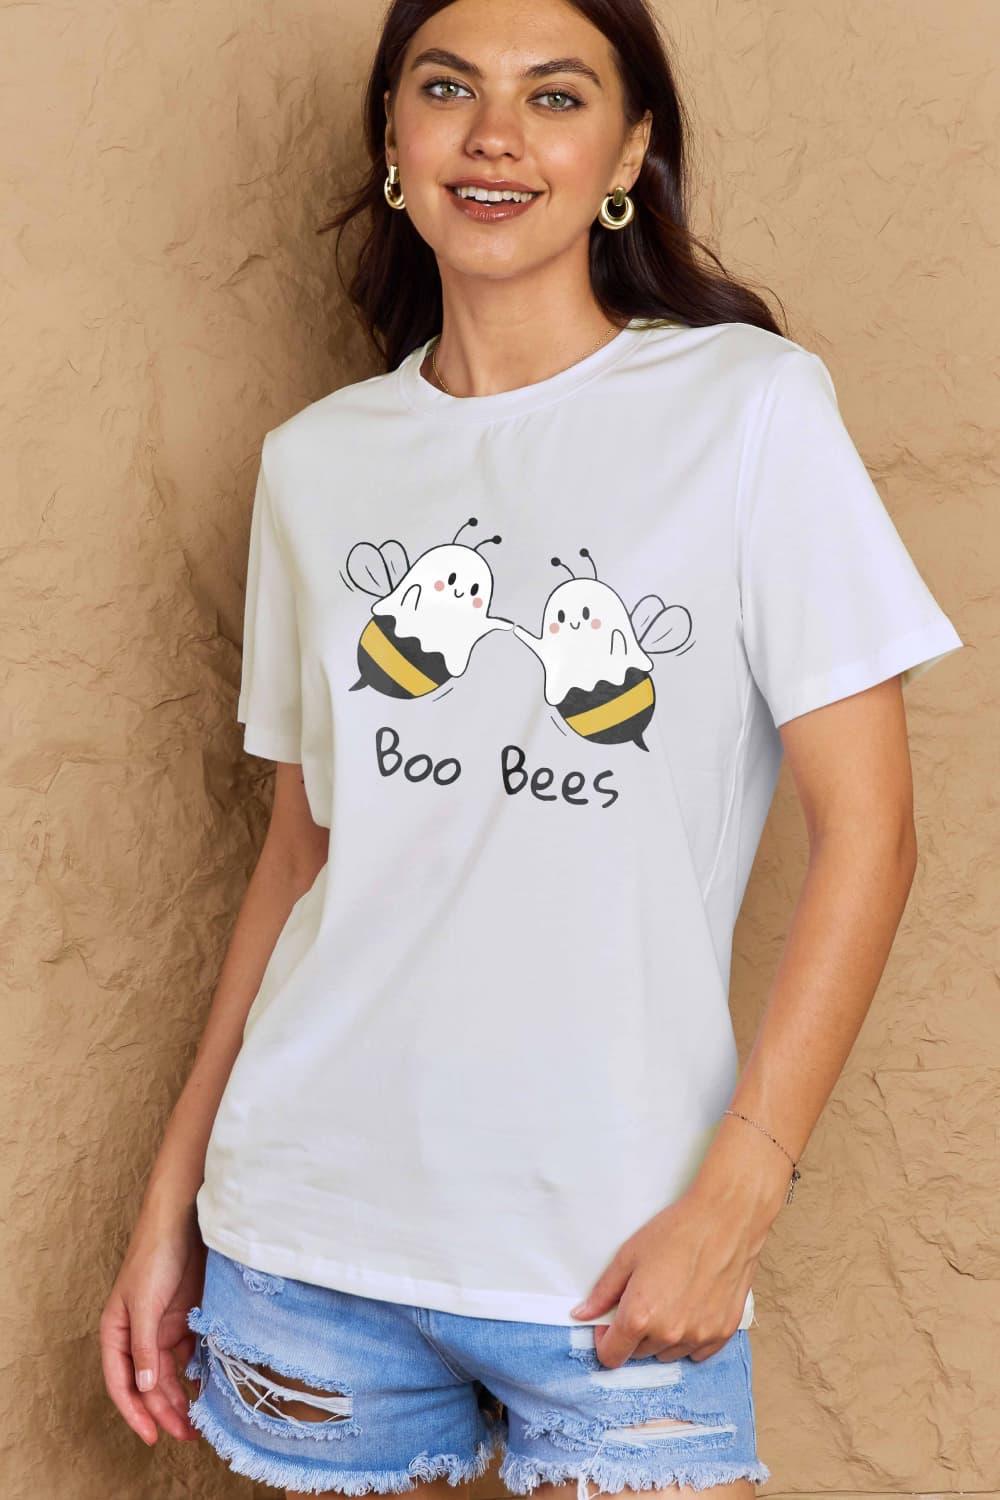 Simply Love Full Size BOO BEES Graphic Cotton T-Shirt - Vesteeto